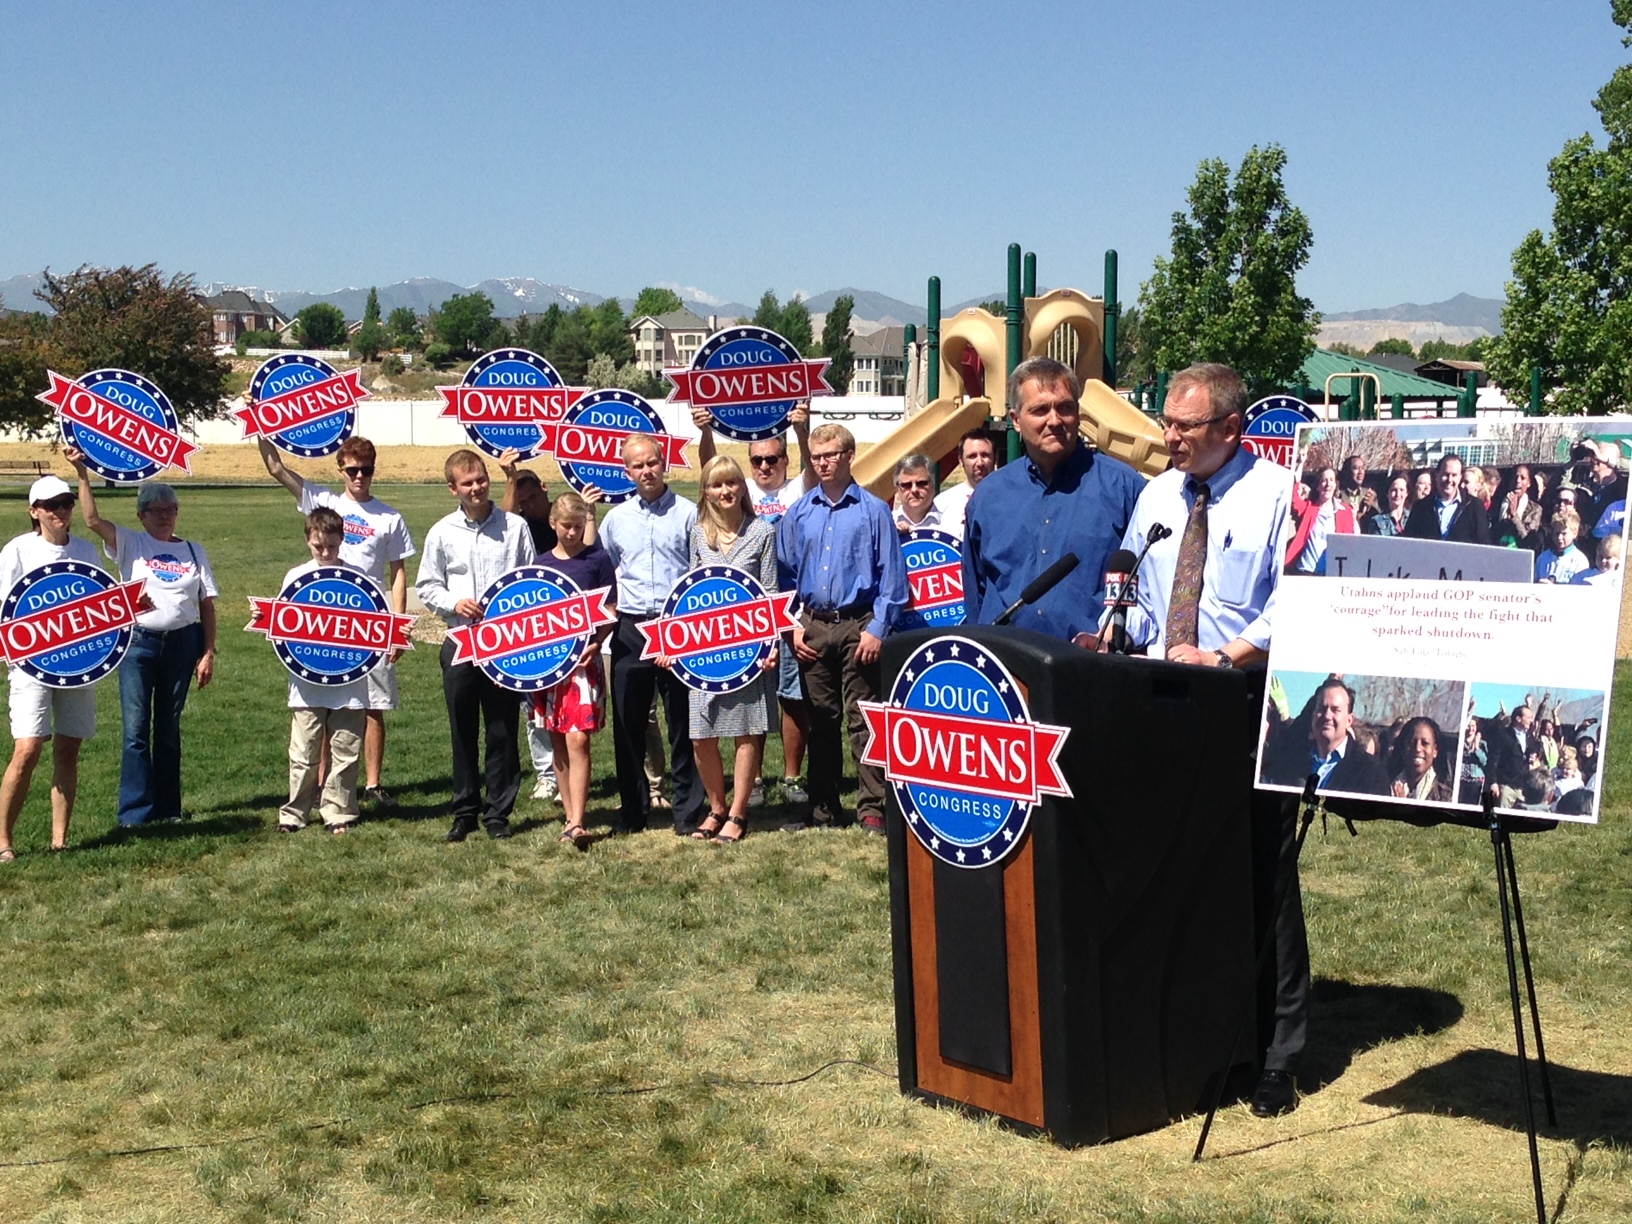 Utah Democratic candidate for Congress Doug Owens speaks at a campaign event alongside Rep. Jim Matheson, who was on hand to offer his endorsement.